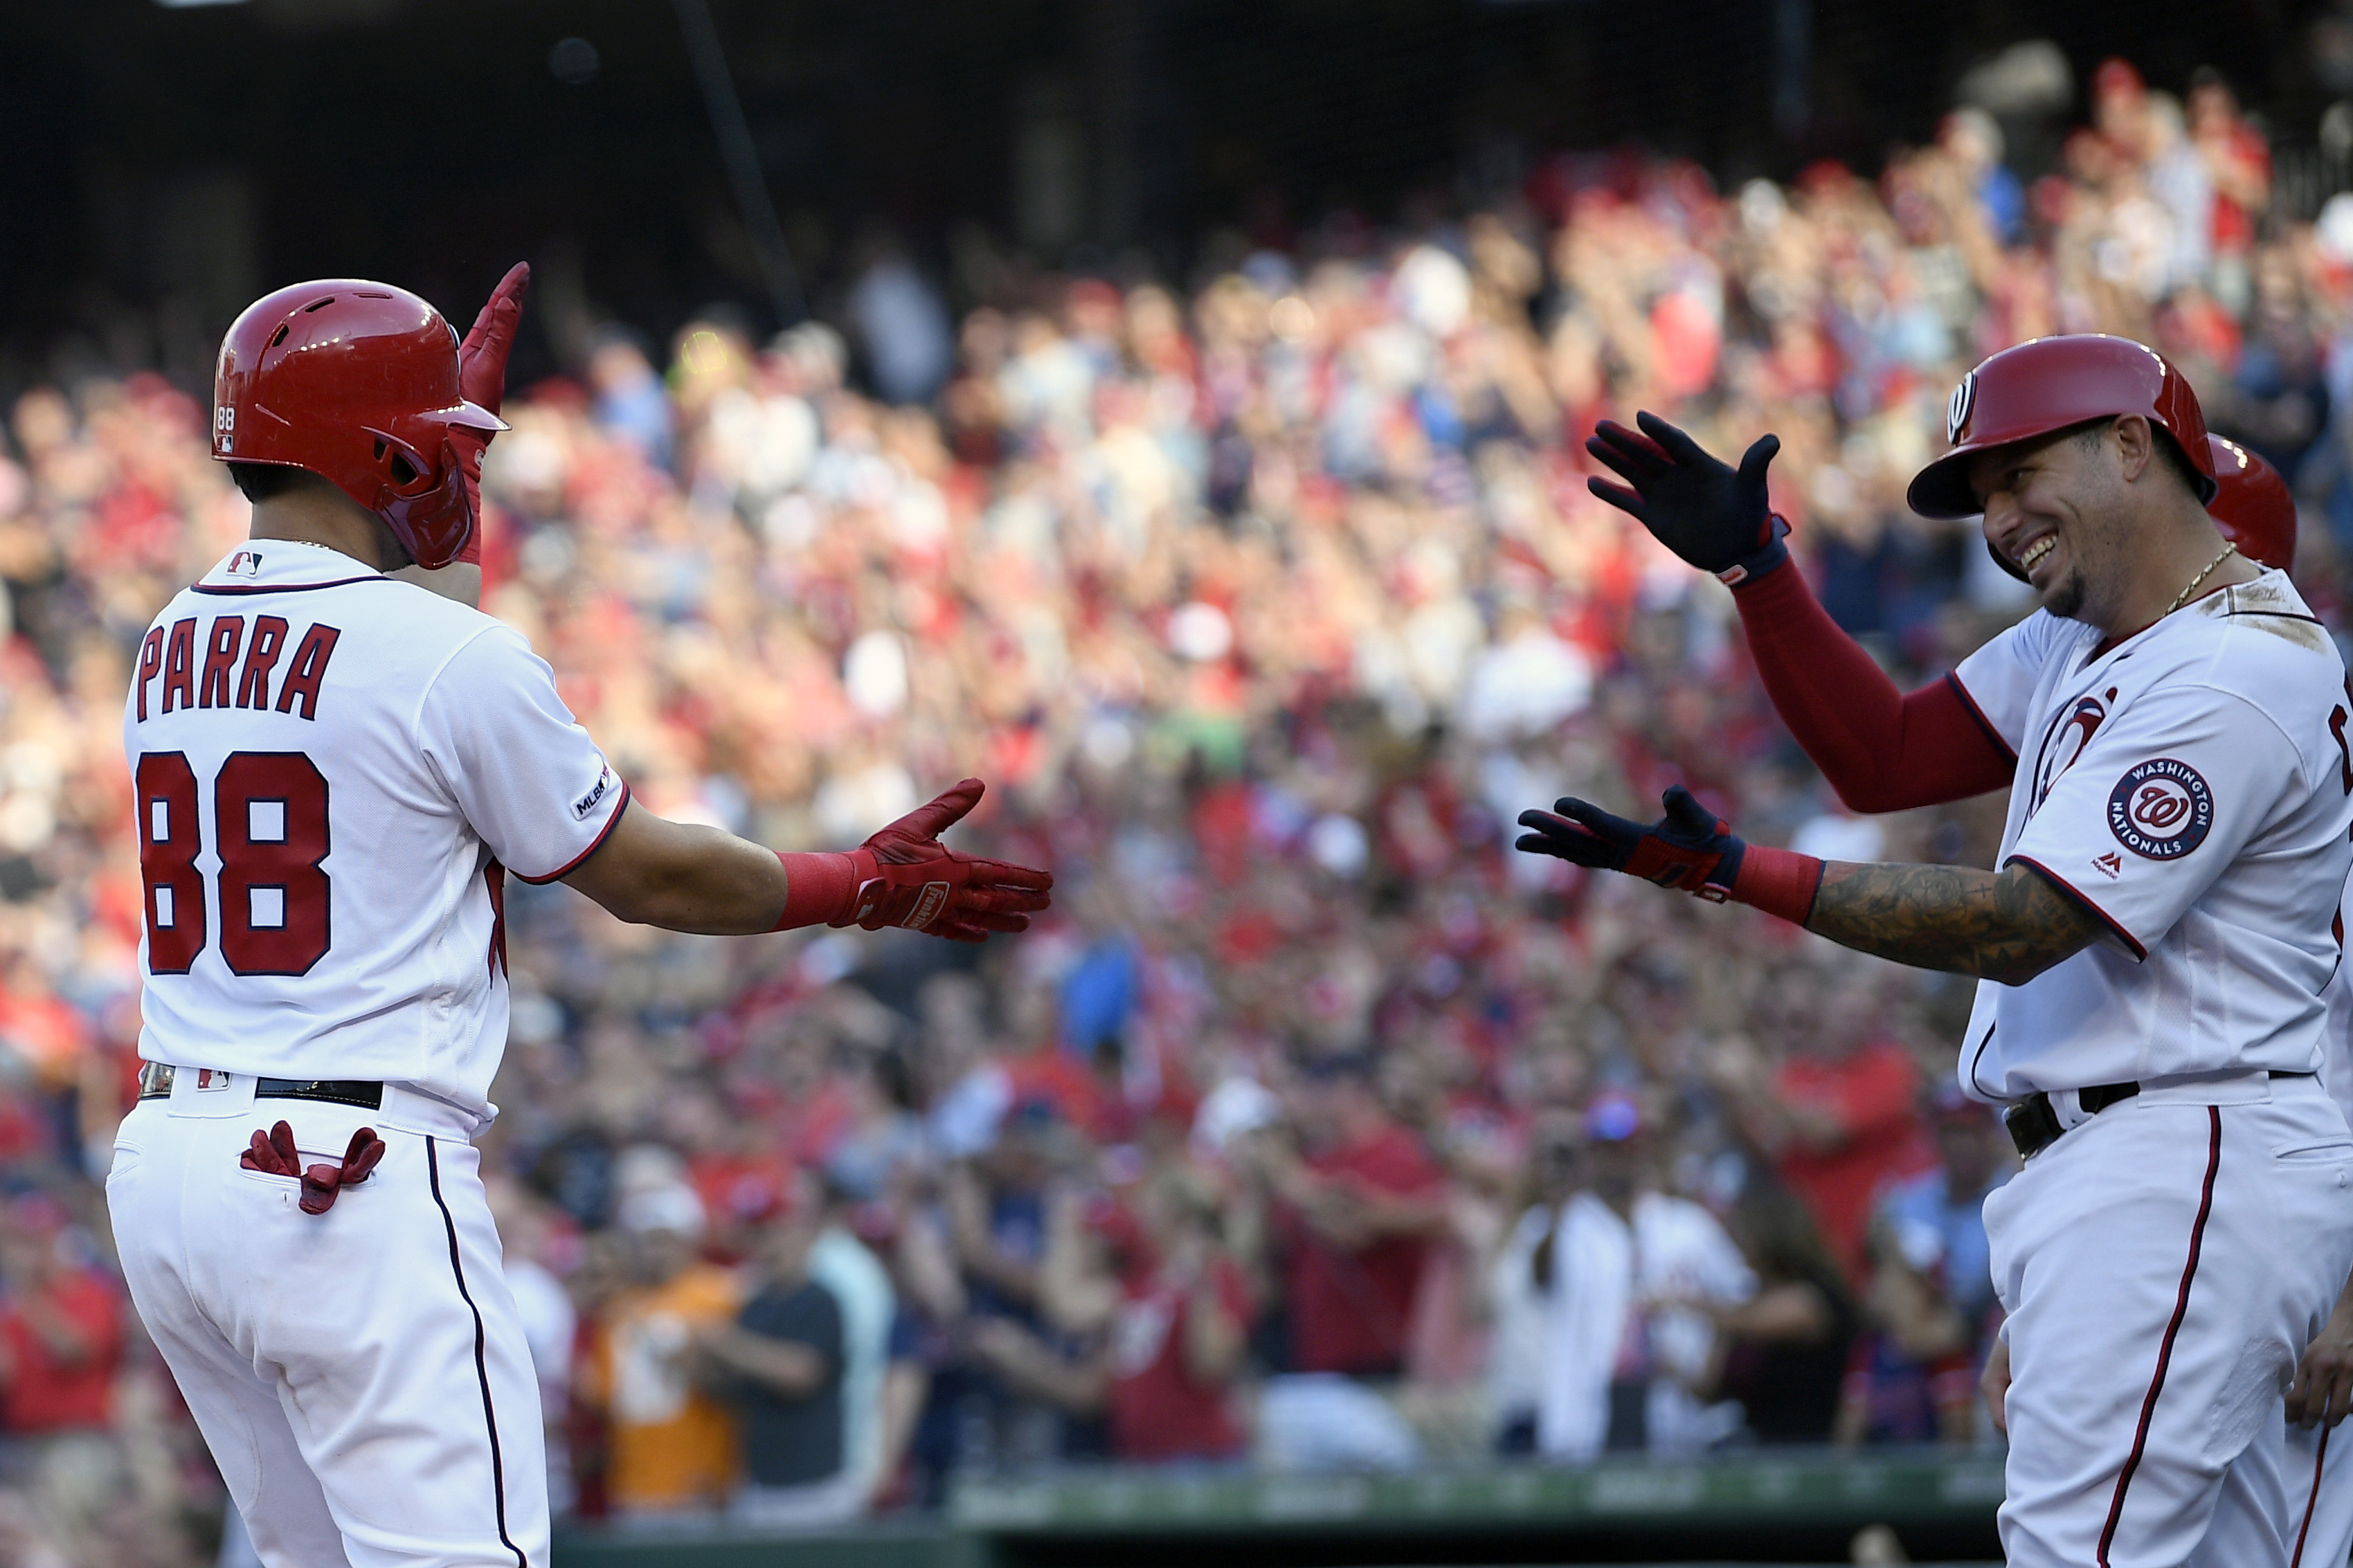 'Baby Shark' slam helps Nats clinch hosting wild-card game